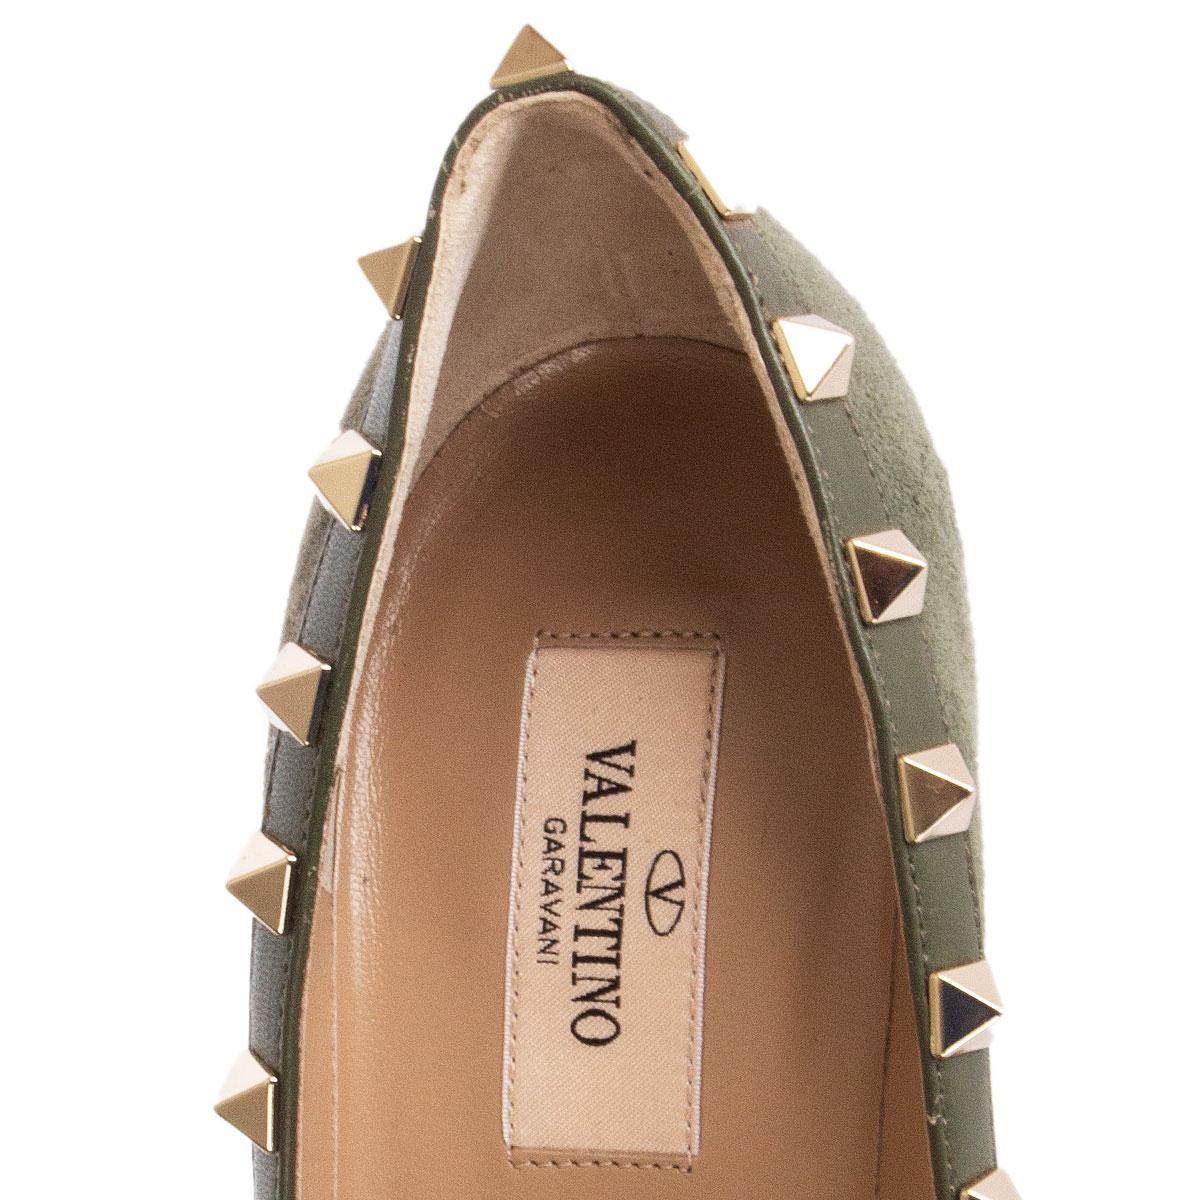 VALENTINO green suede ROCKSTUD 85 POINTED-TOE Pumps Shoes 39 1